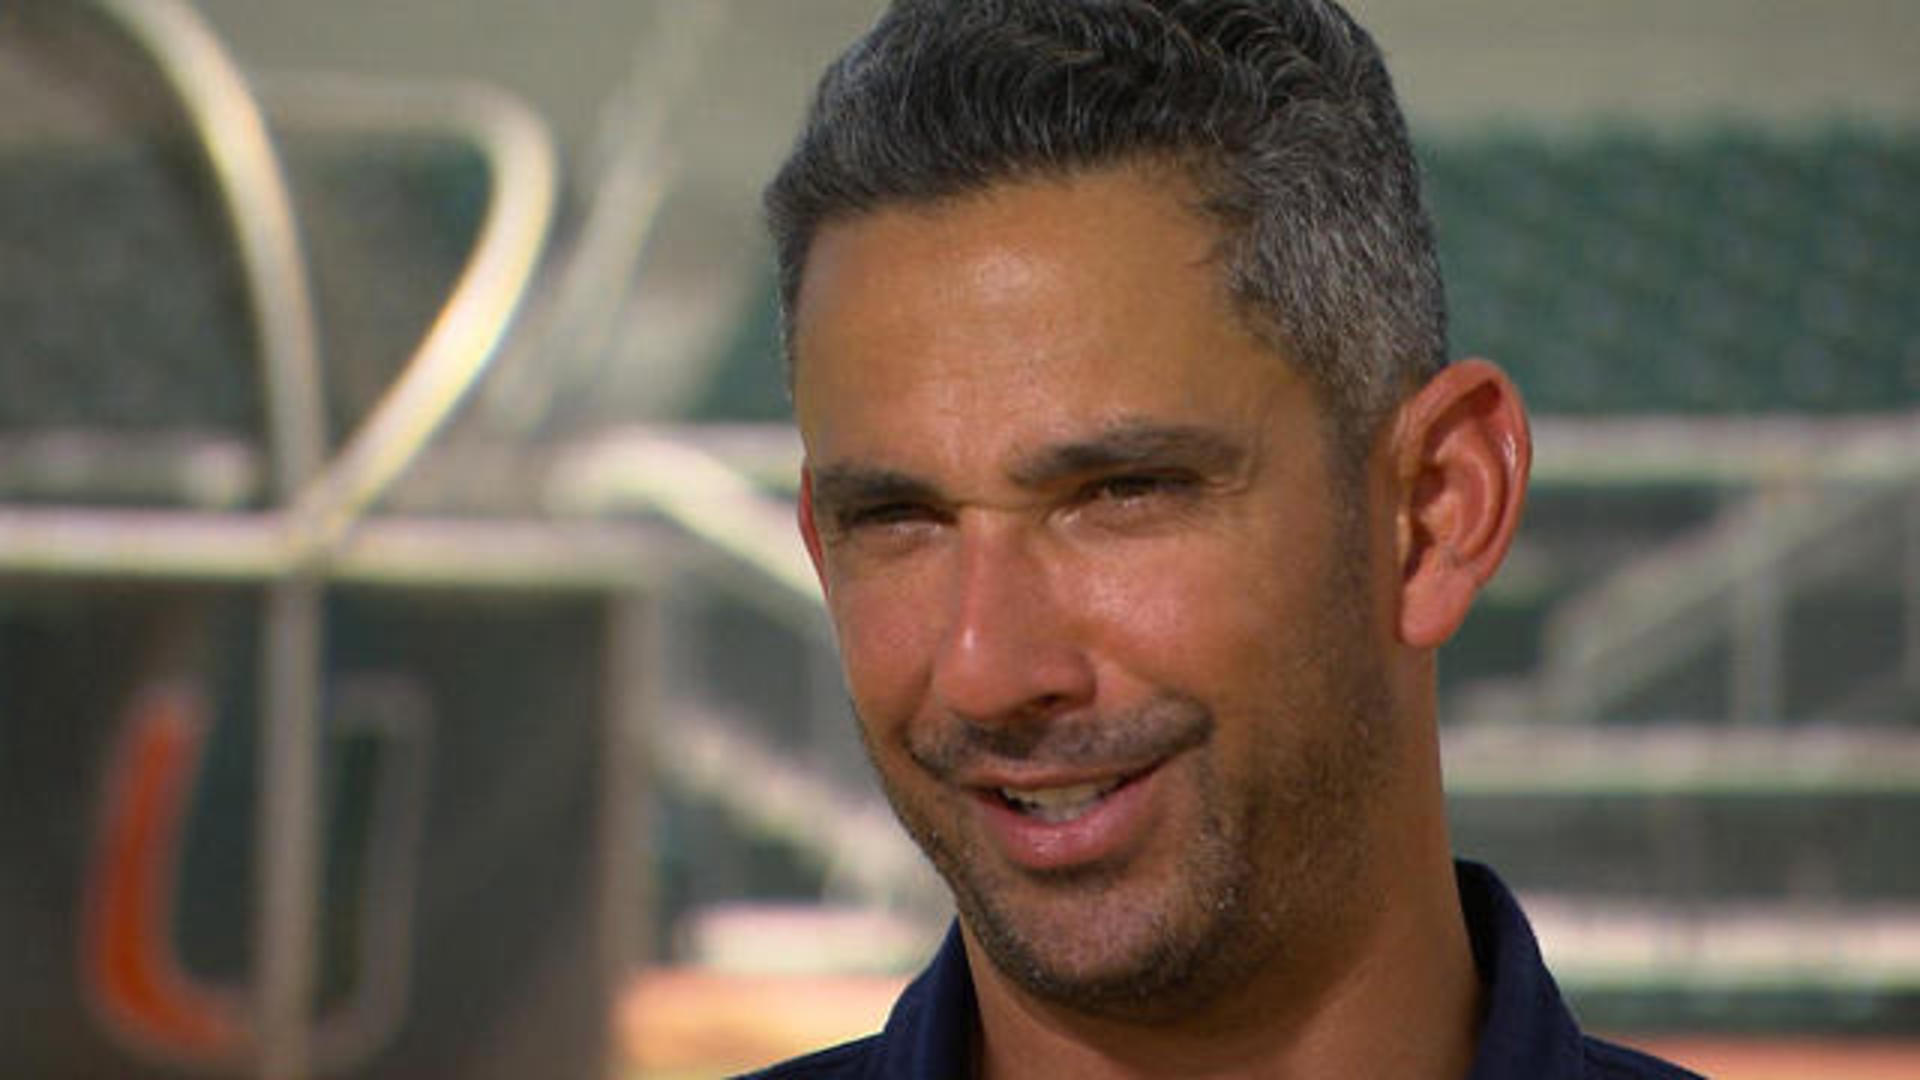 Jorge Posada: A-Rod being in Hall of Fame would not be fair - CBS News